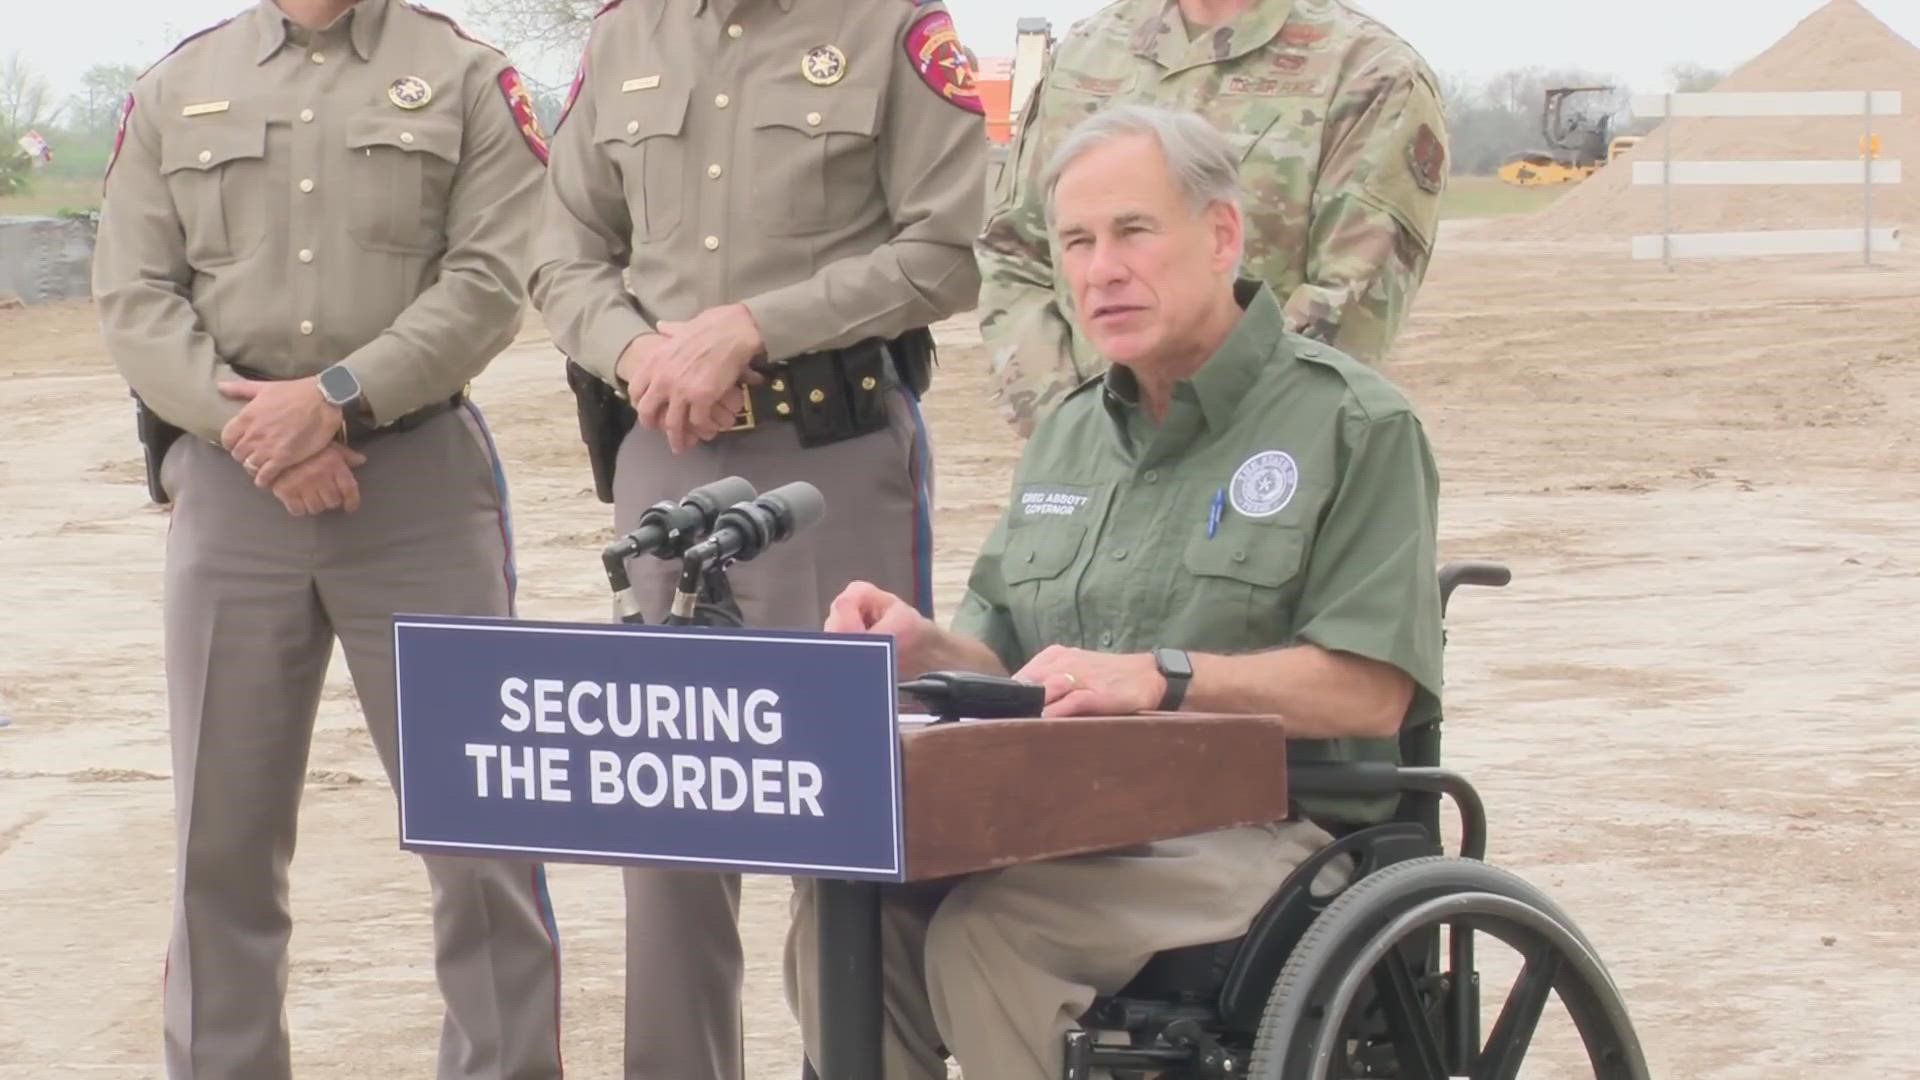 Gov. Abbott made the announcement during a news conference in San Benito.